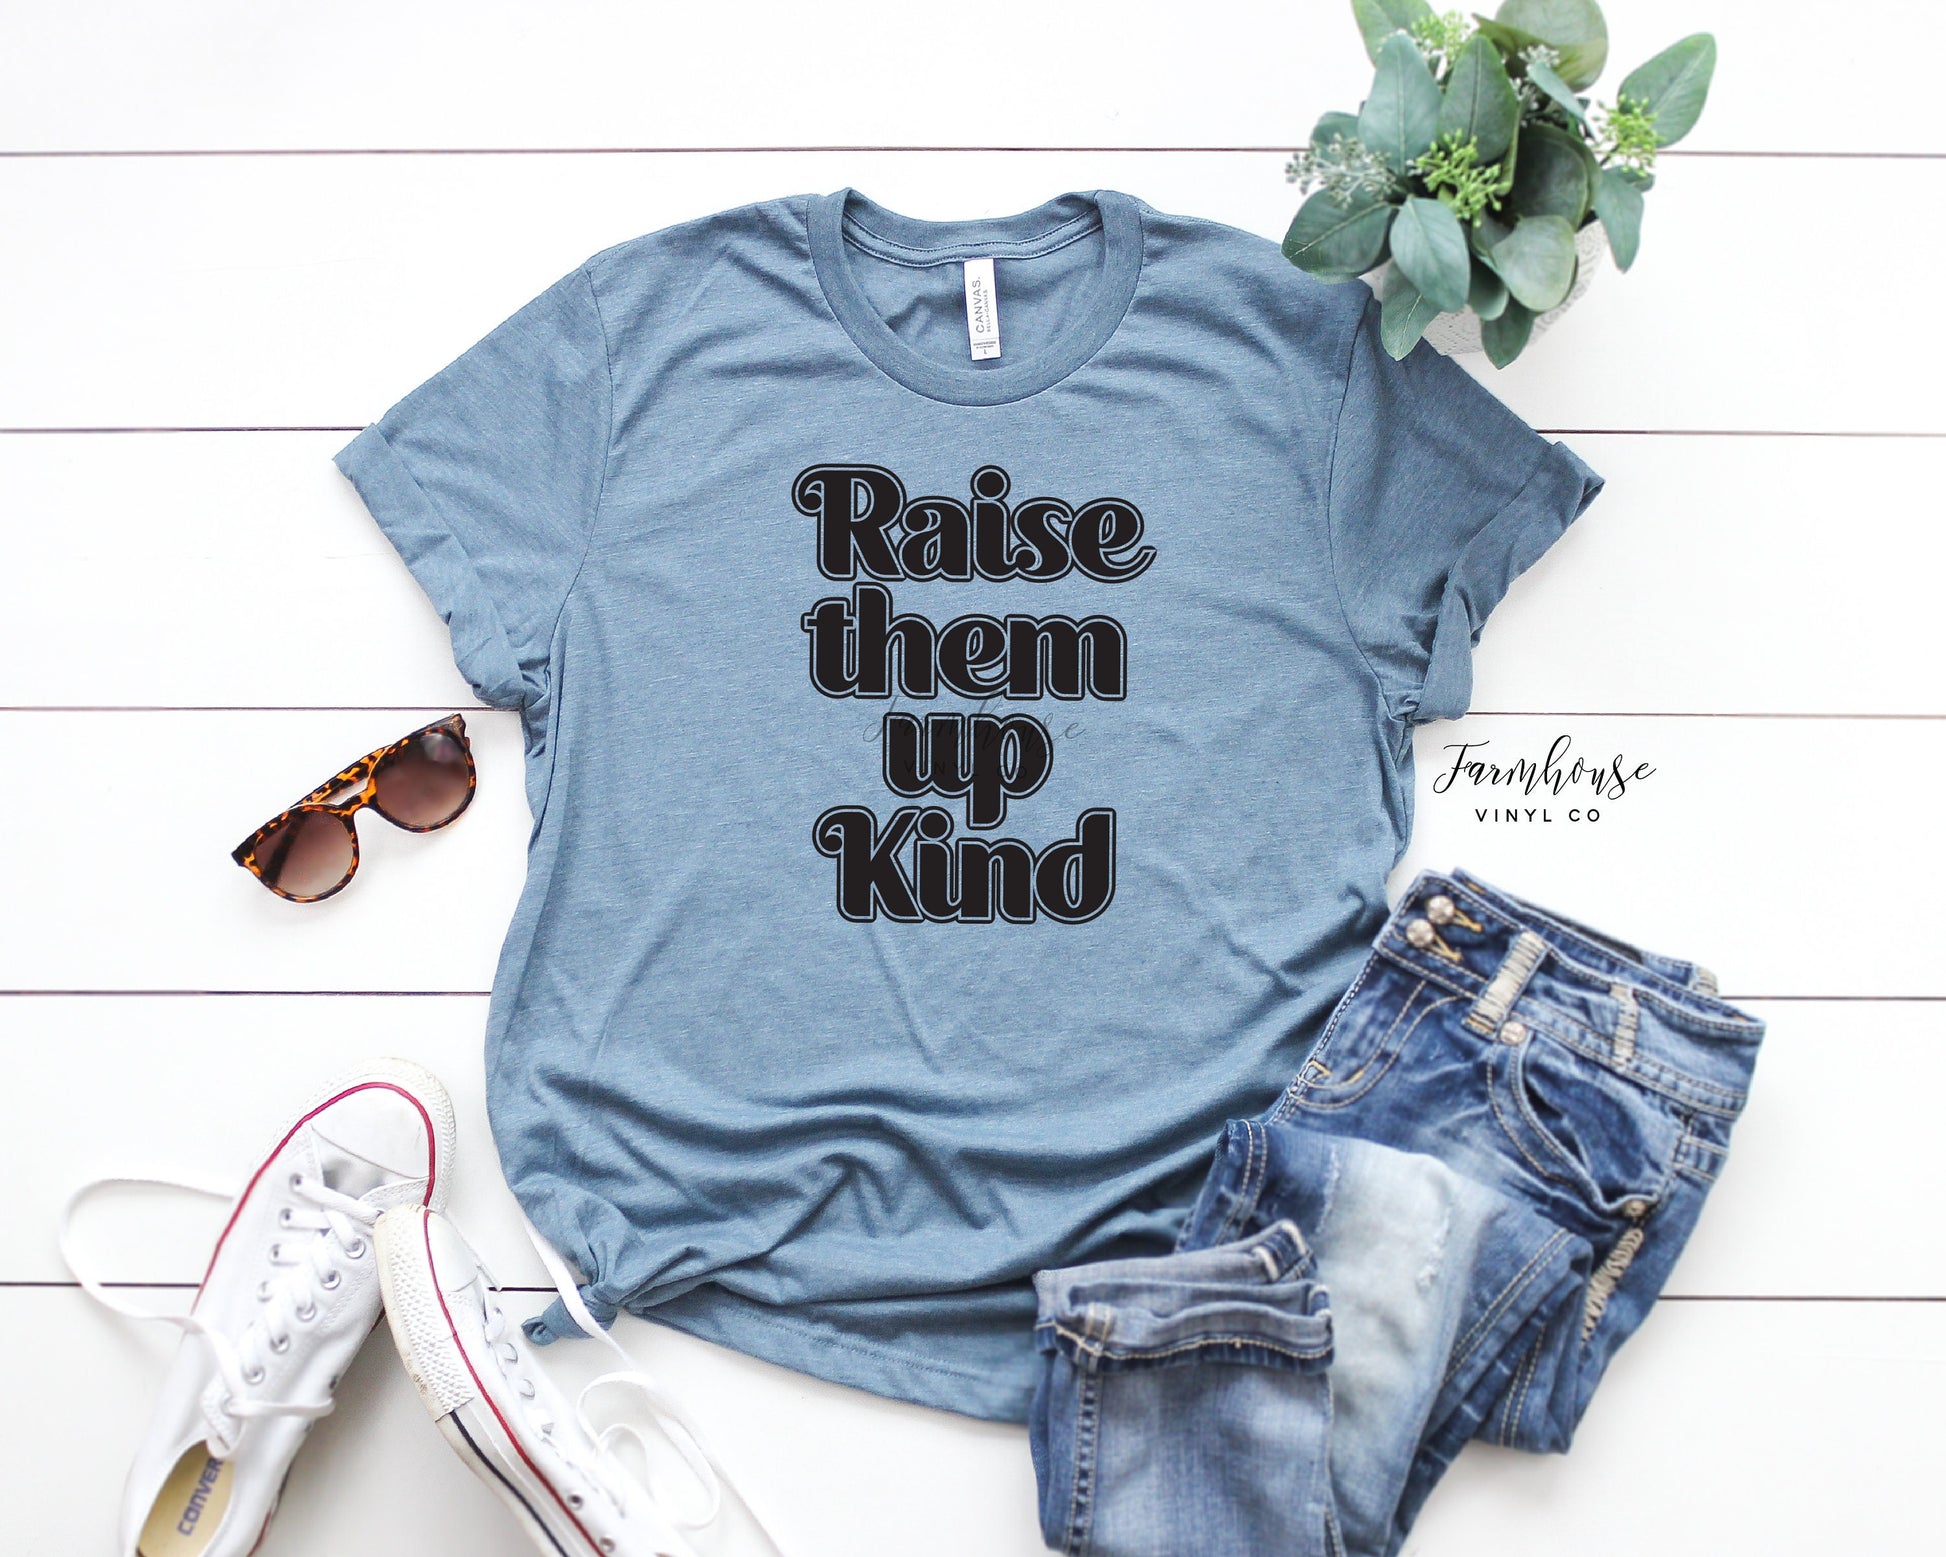 Raise Them Up Kind Tee Shirt~Mom Shirt Collection~Mom Tee Shirts~Mom Tee~Mom Shirts~SAHM~Mothers Day Gift~Homeschool Mom~Mommy Group Dropout - Farmhouse Vinyl Co